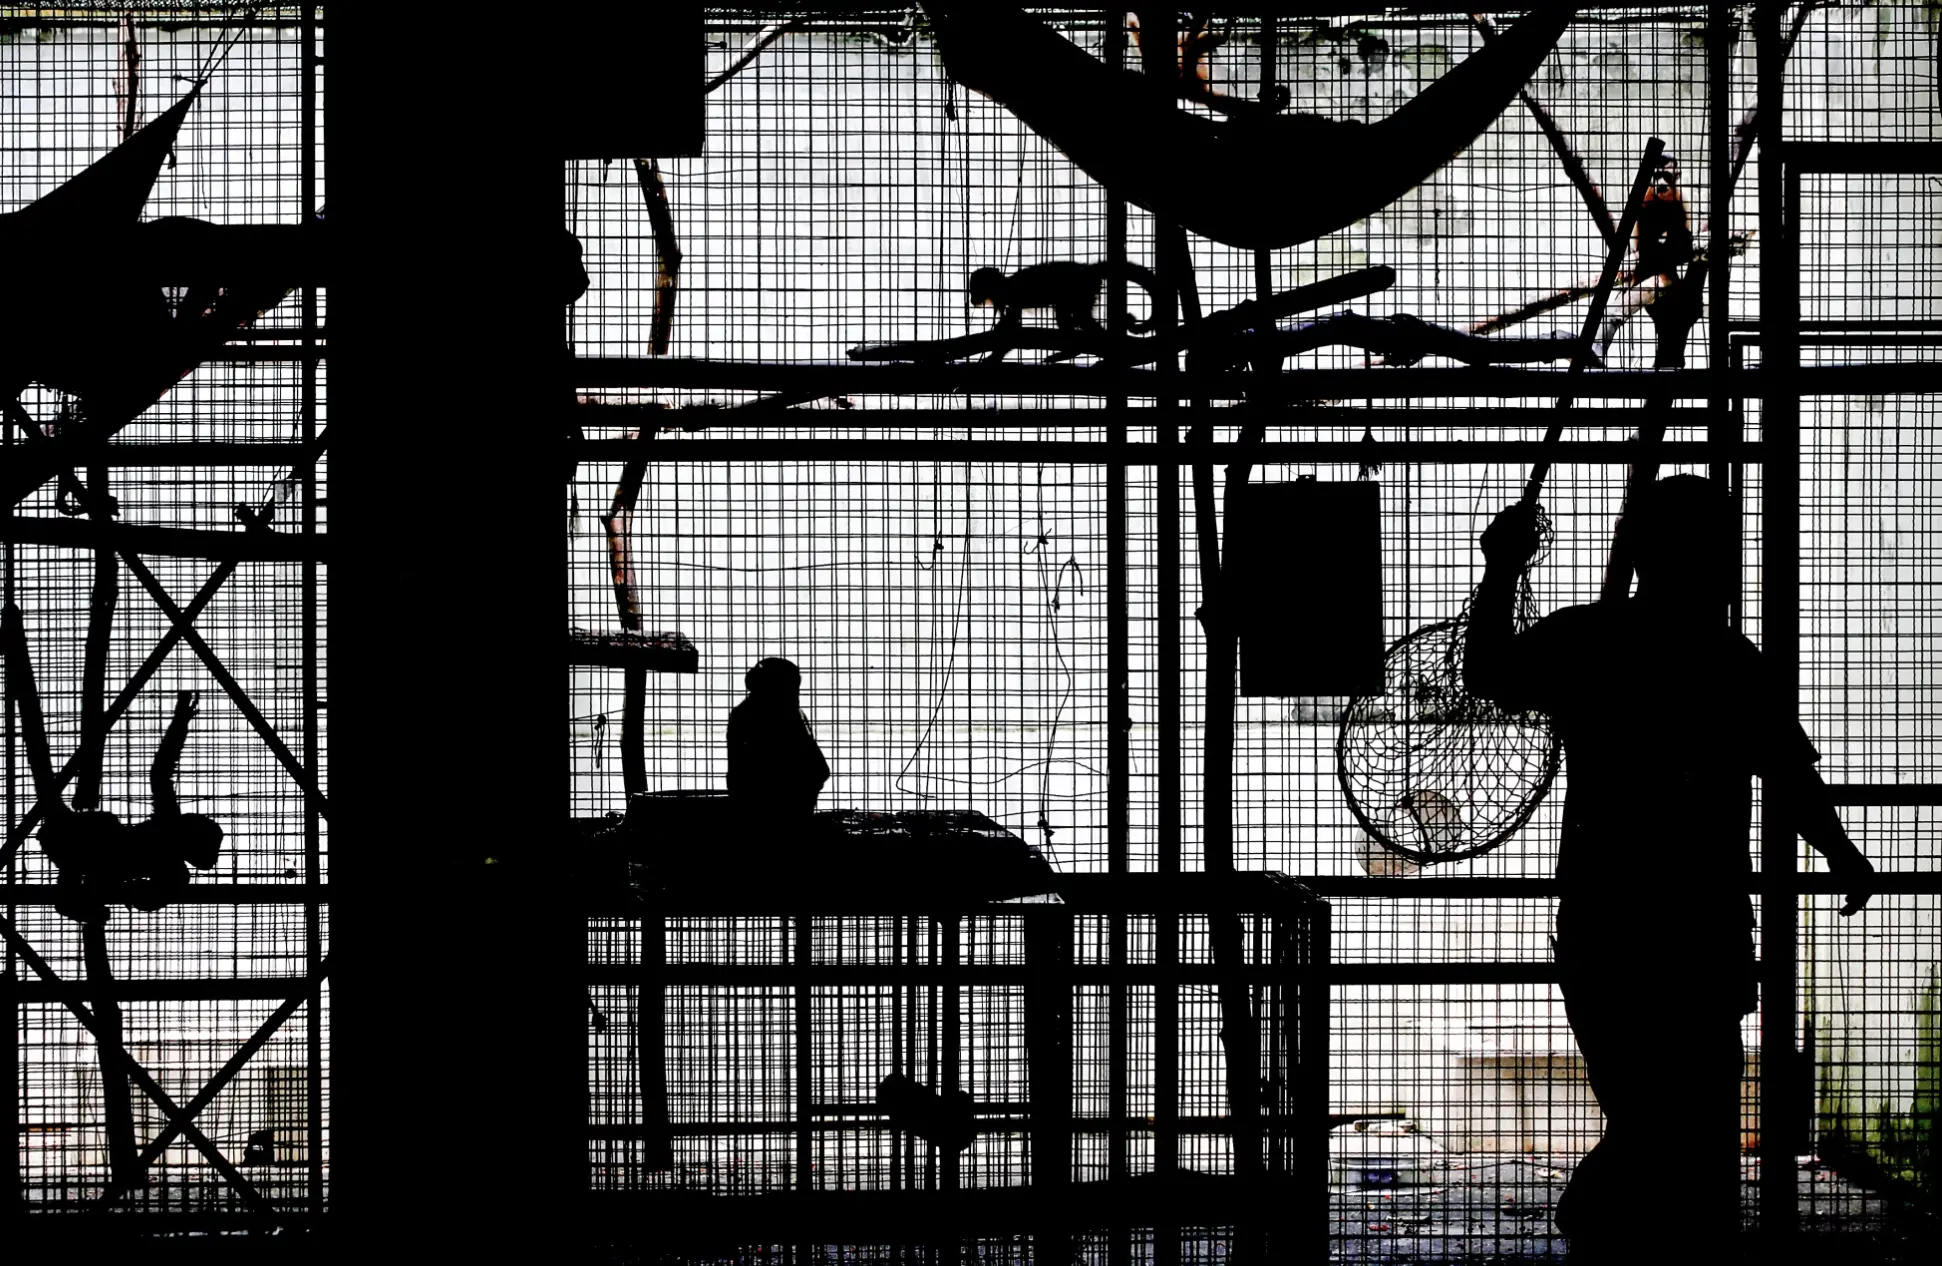 A worker tends to caged primates at a wildlife research facility in Manaus